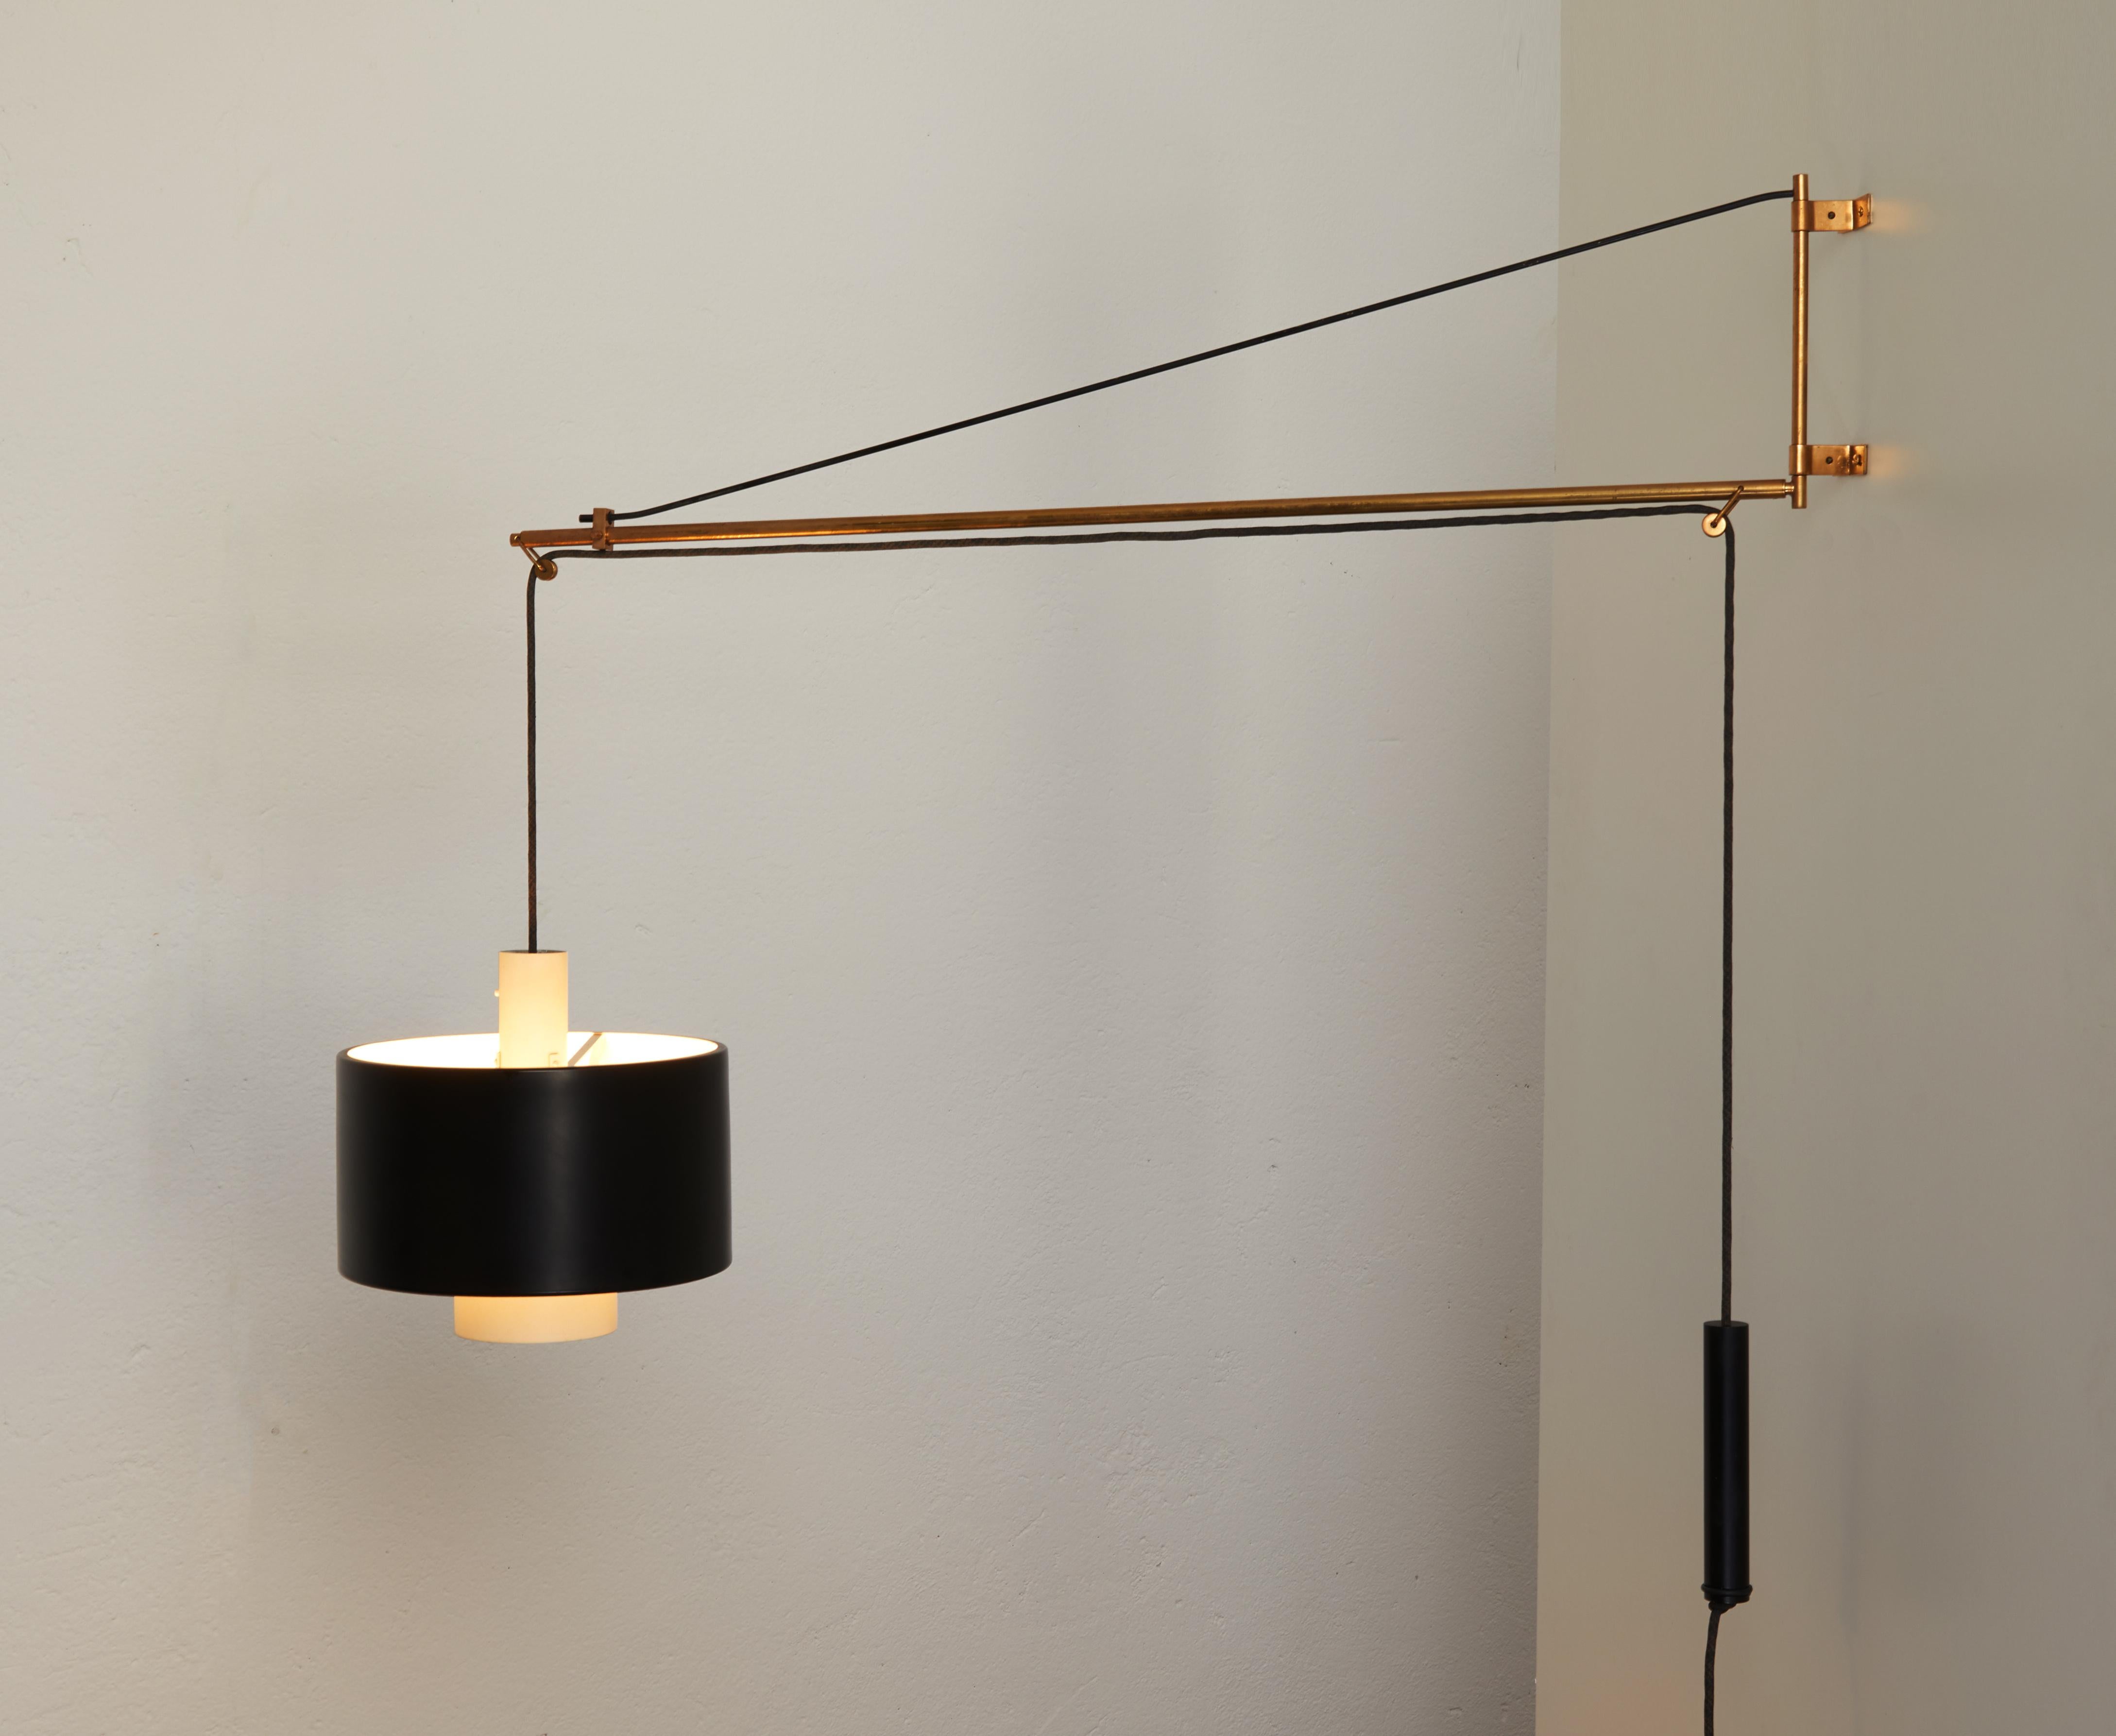 Large adjustable wall lamp model 2061 by Gaetano Scolari for Stilnovo 1954.

Brass structure composed of a telescopic arm and a pulley system with a counterweight which allows to adjust the height of the reflector.

The reflector is composed of